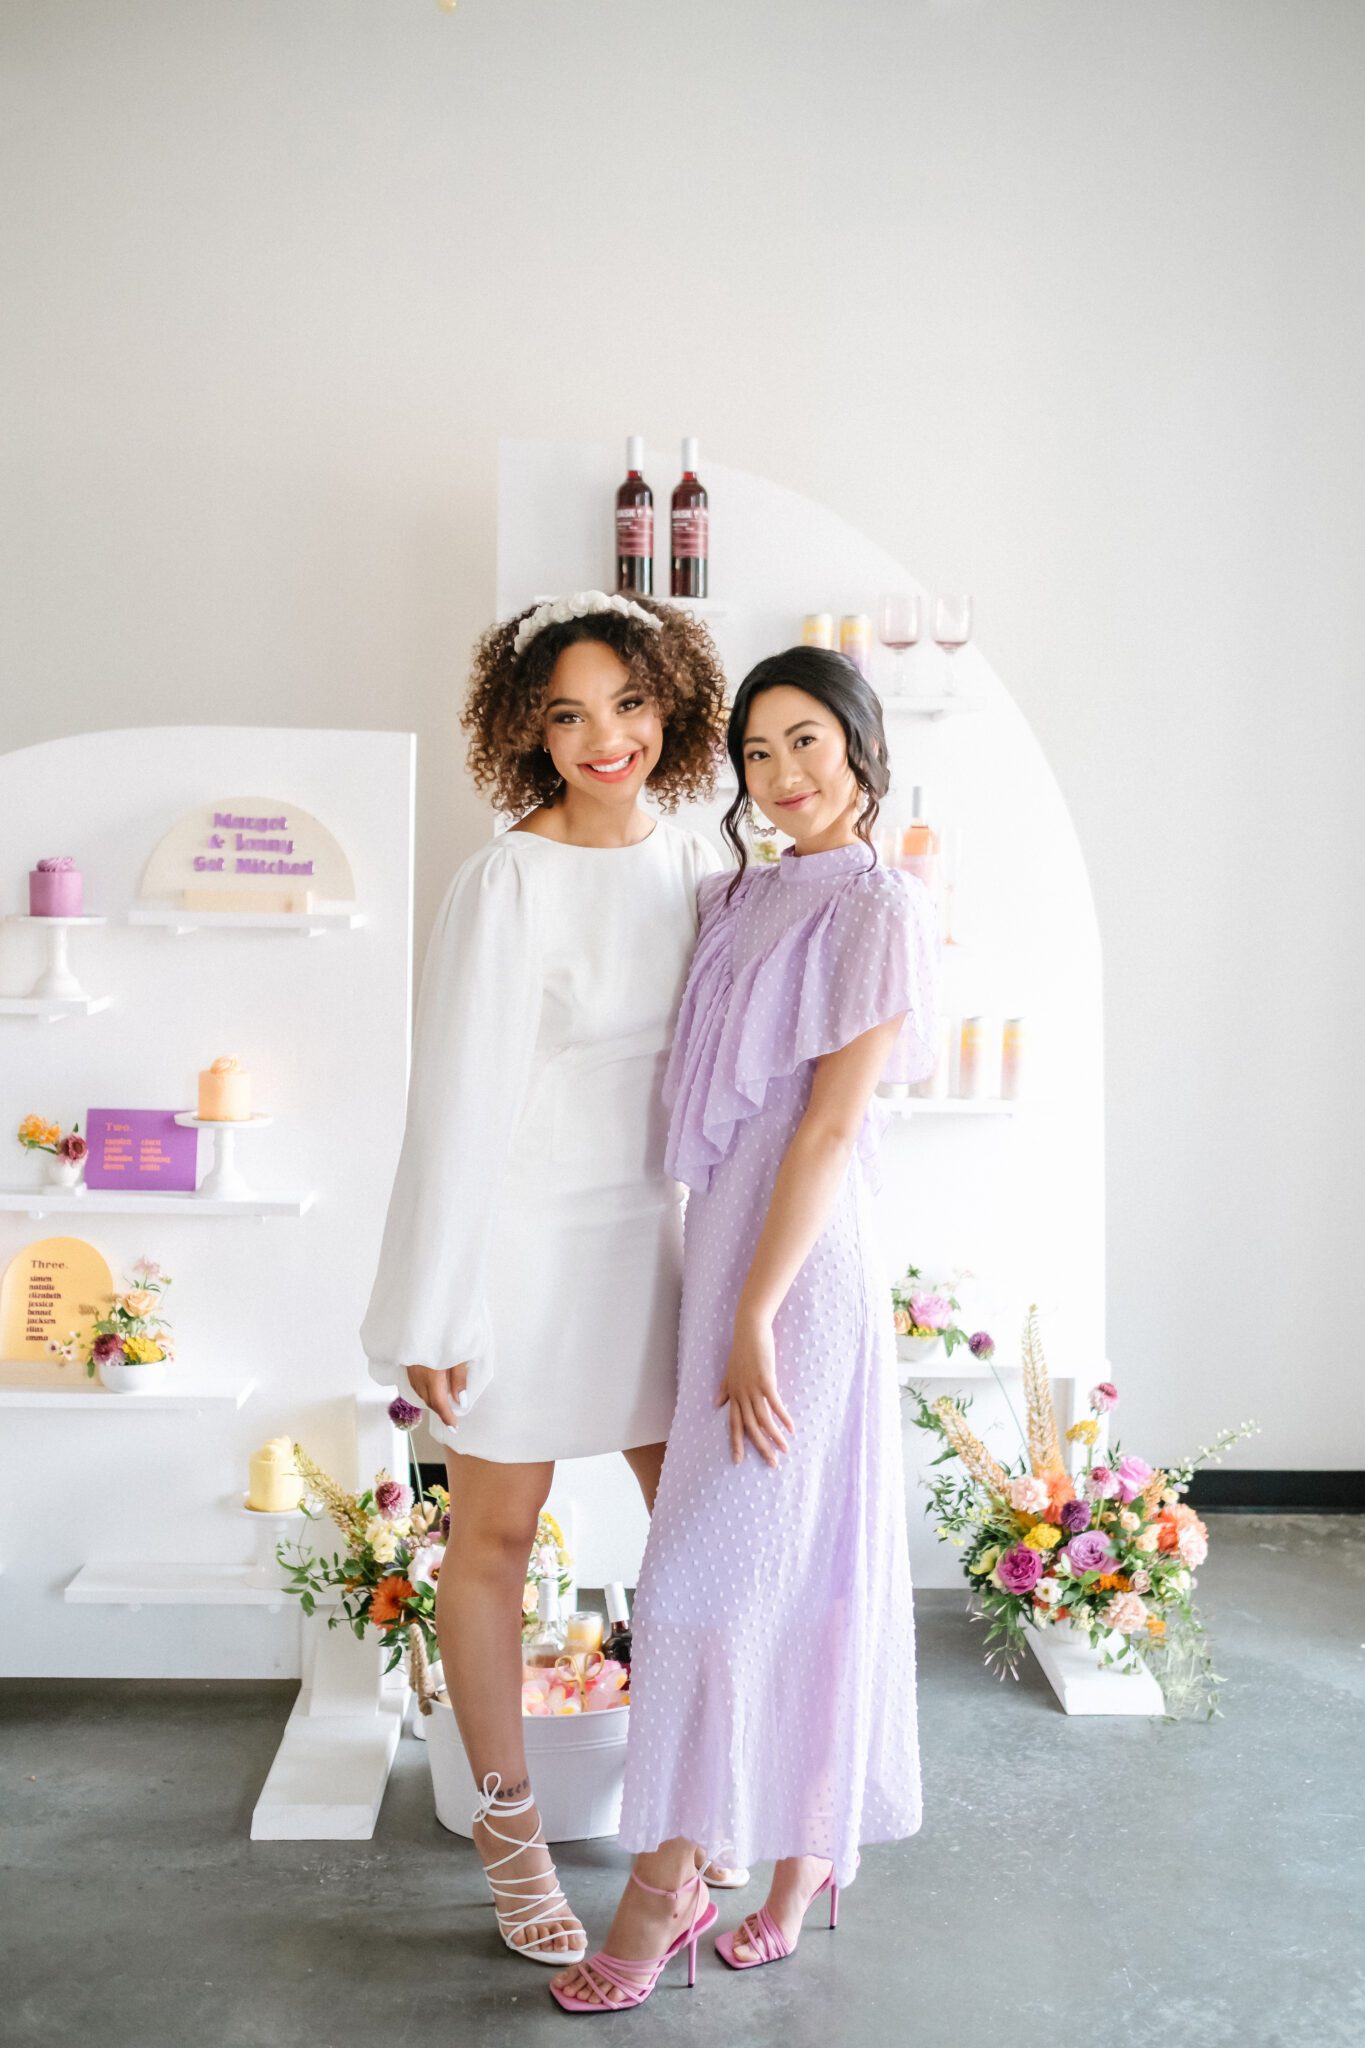 Retro-inspried purple bridesmaid dress, and short bridal gown with flowing sleeve. Bright and colourful wedding at The Brownstone Calgary, brunch wedding inspiration that combines mod style with retro decor. Tangerine, peach, purple and yellow colour scheme. Custom cocktails, retro inspired signage and custom mini wedding cakes.  